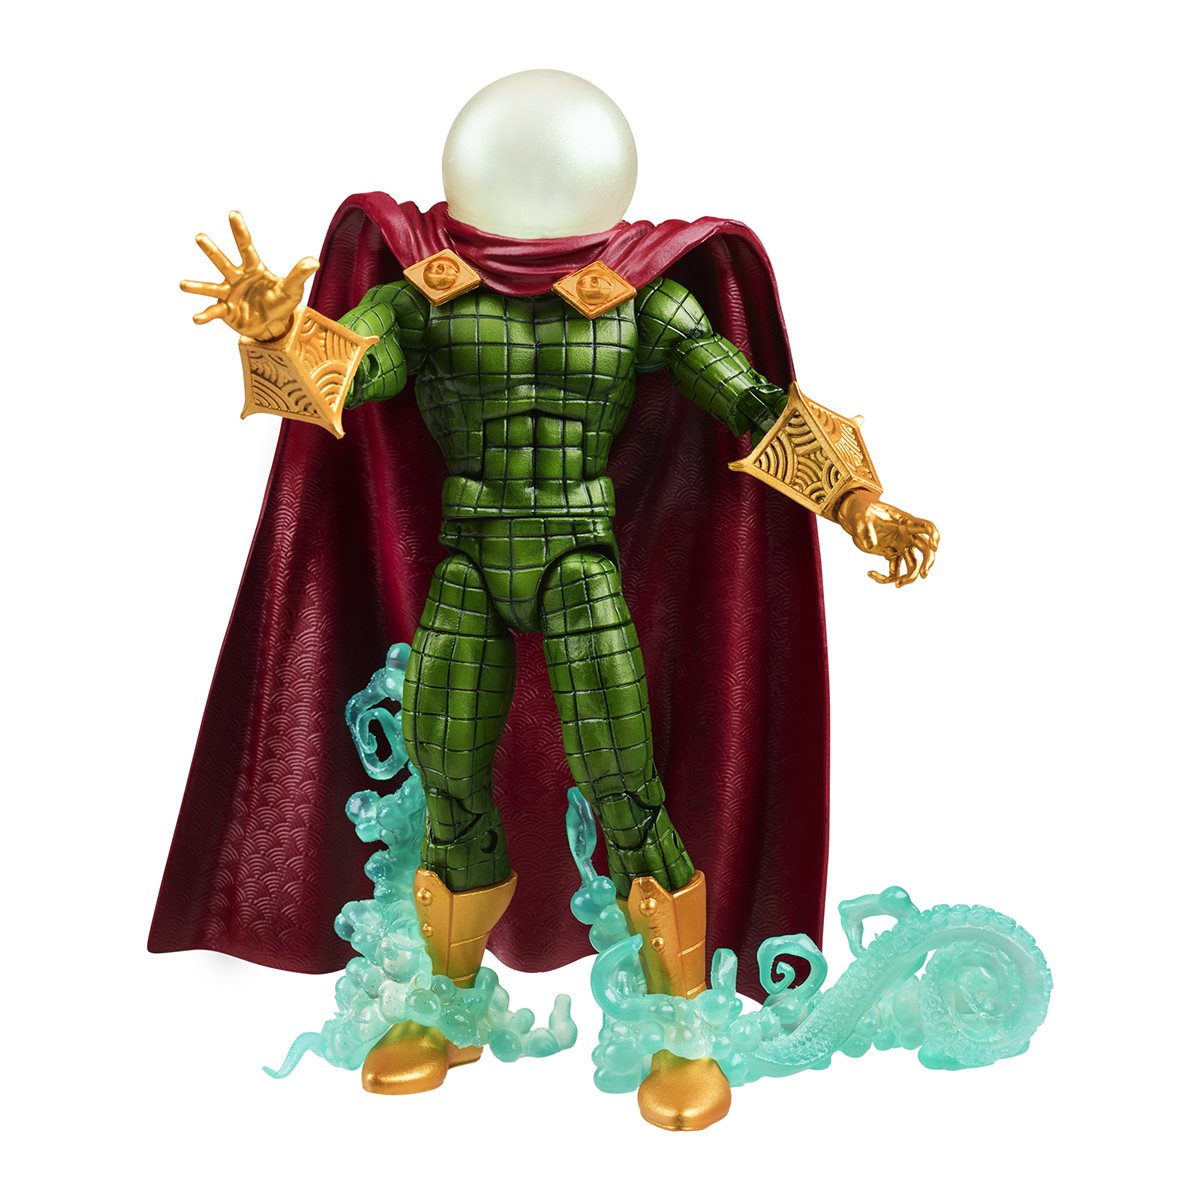 mysterio 12 inch action figure